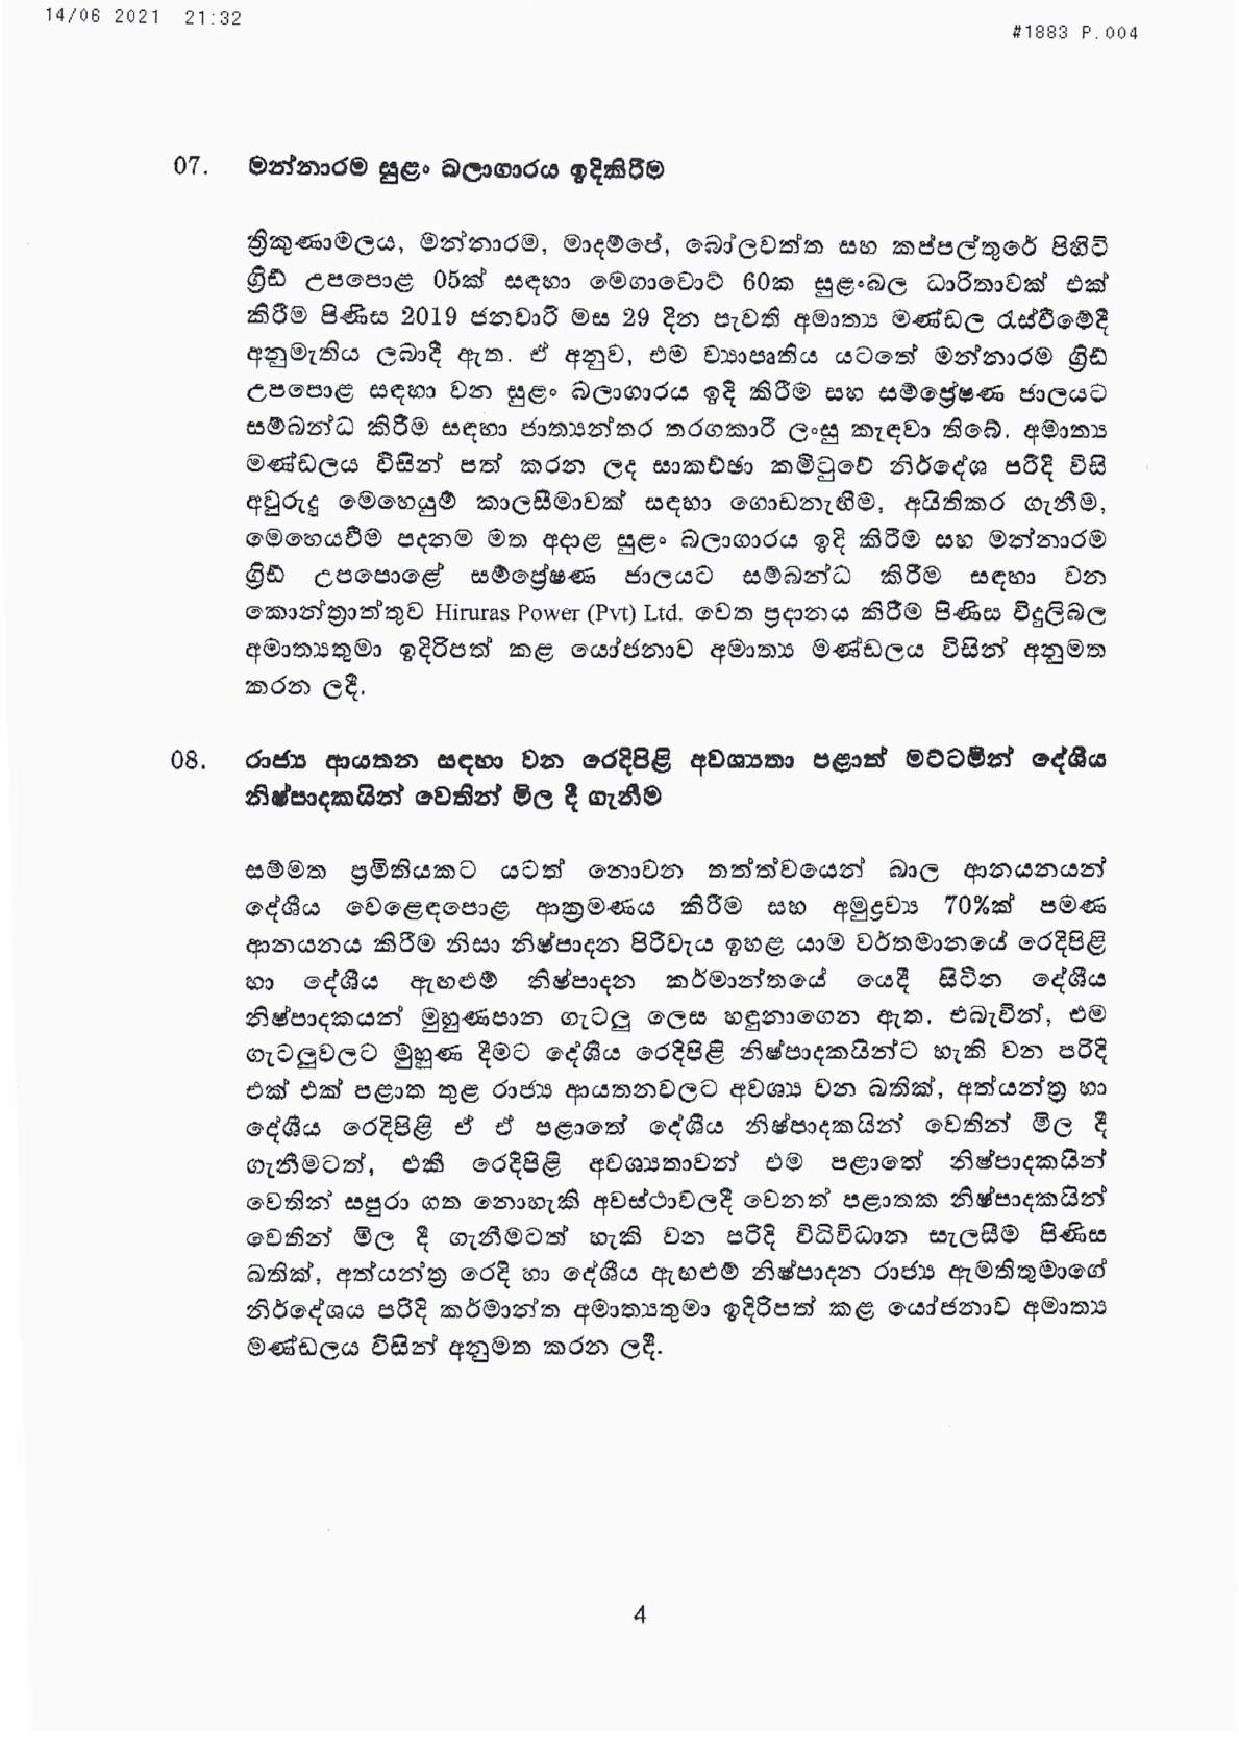 Cabinet Decisions on 14.06.2021 page 004